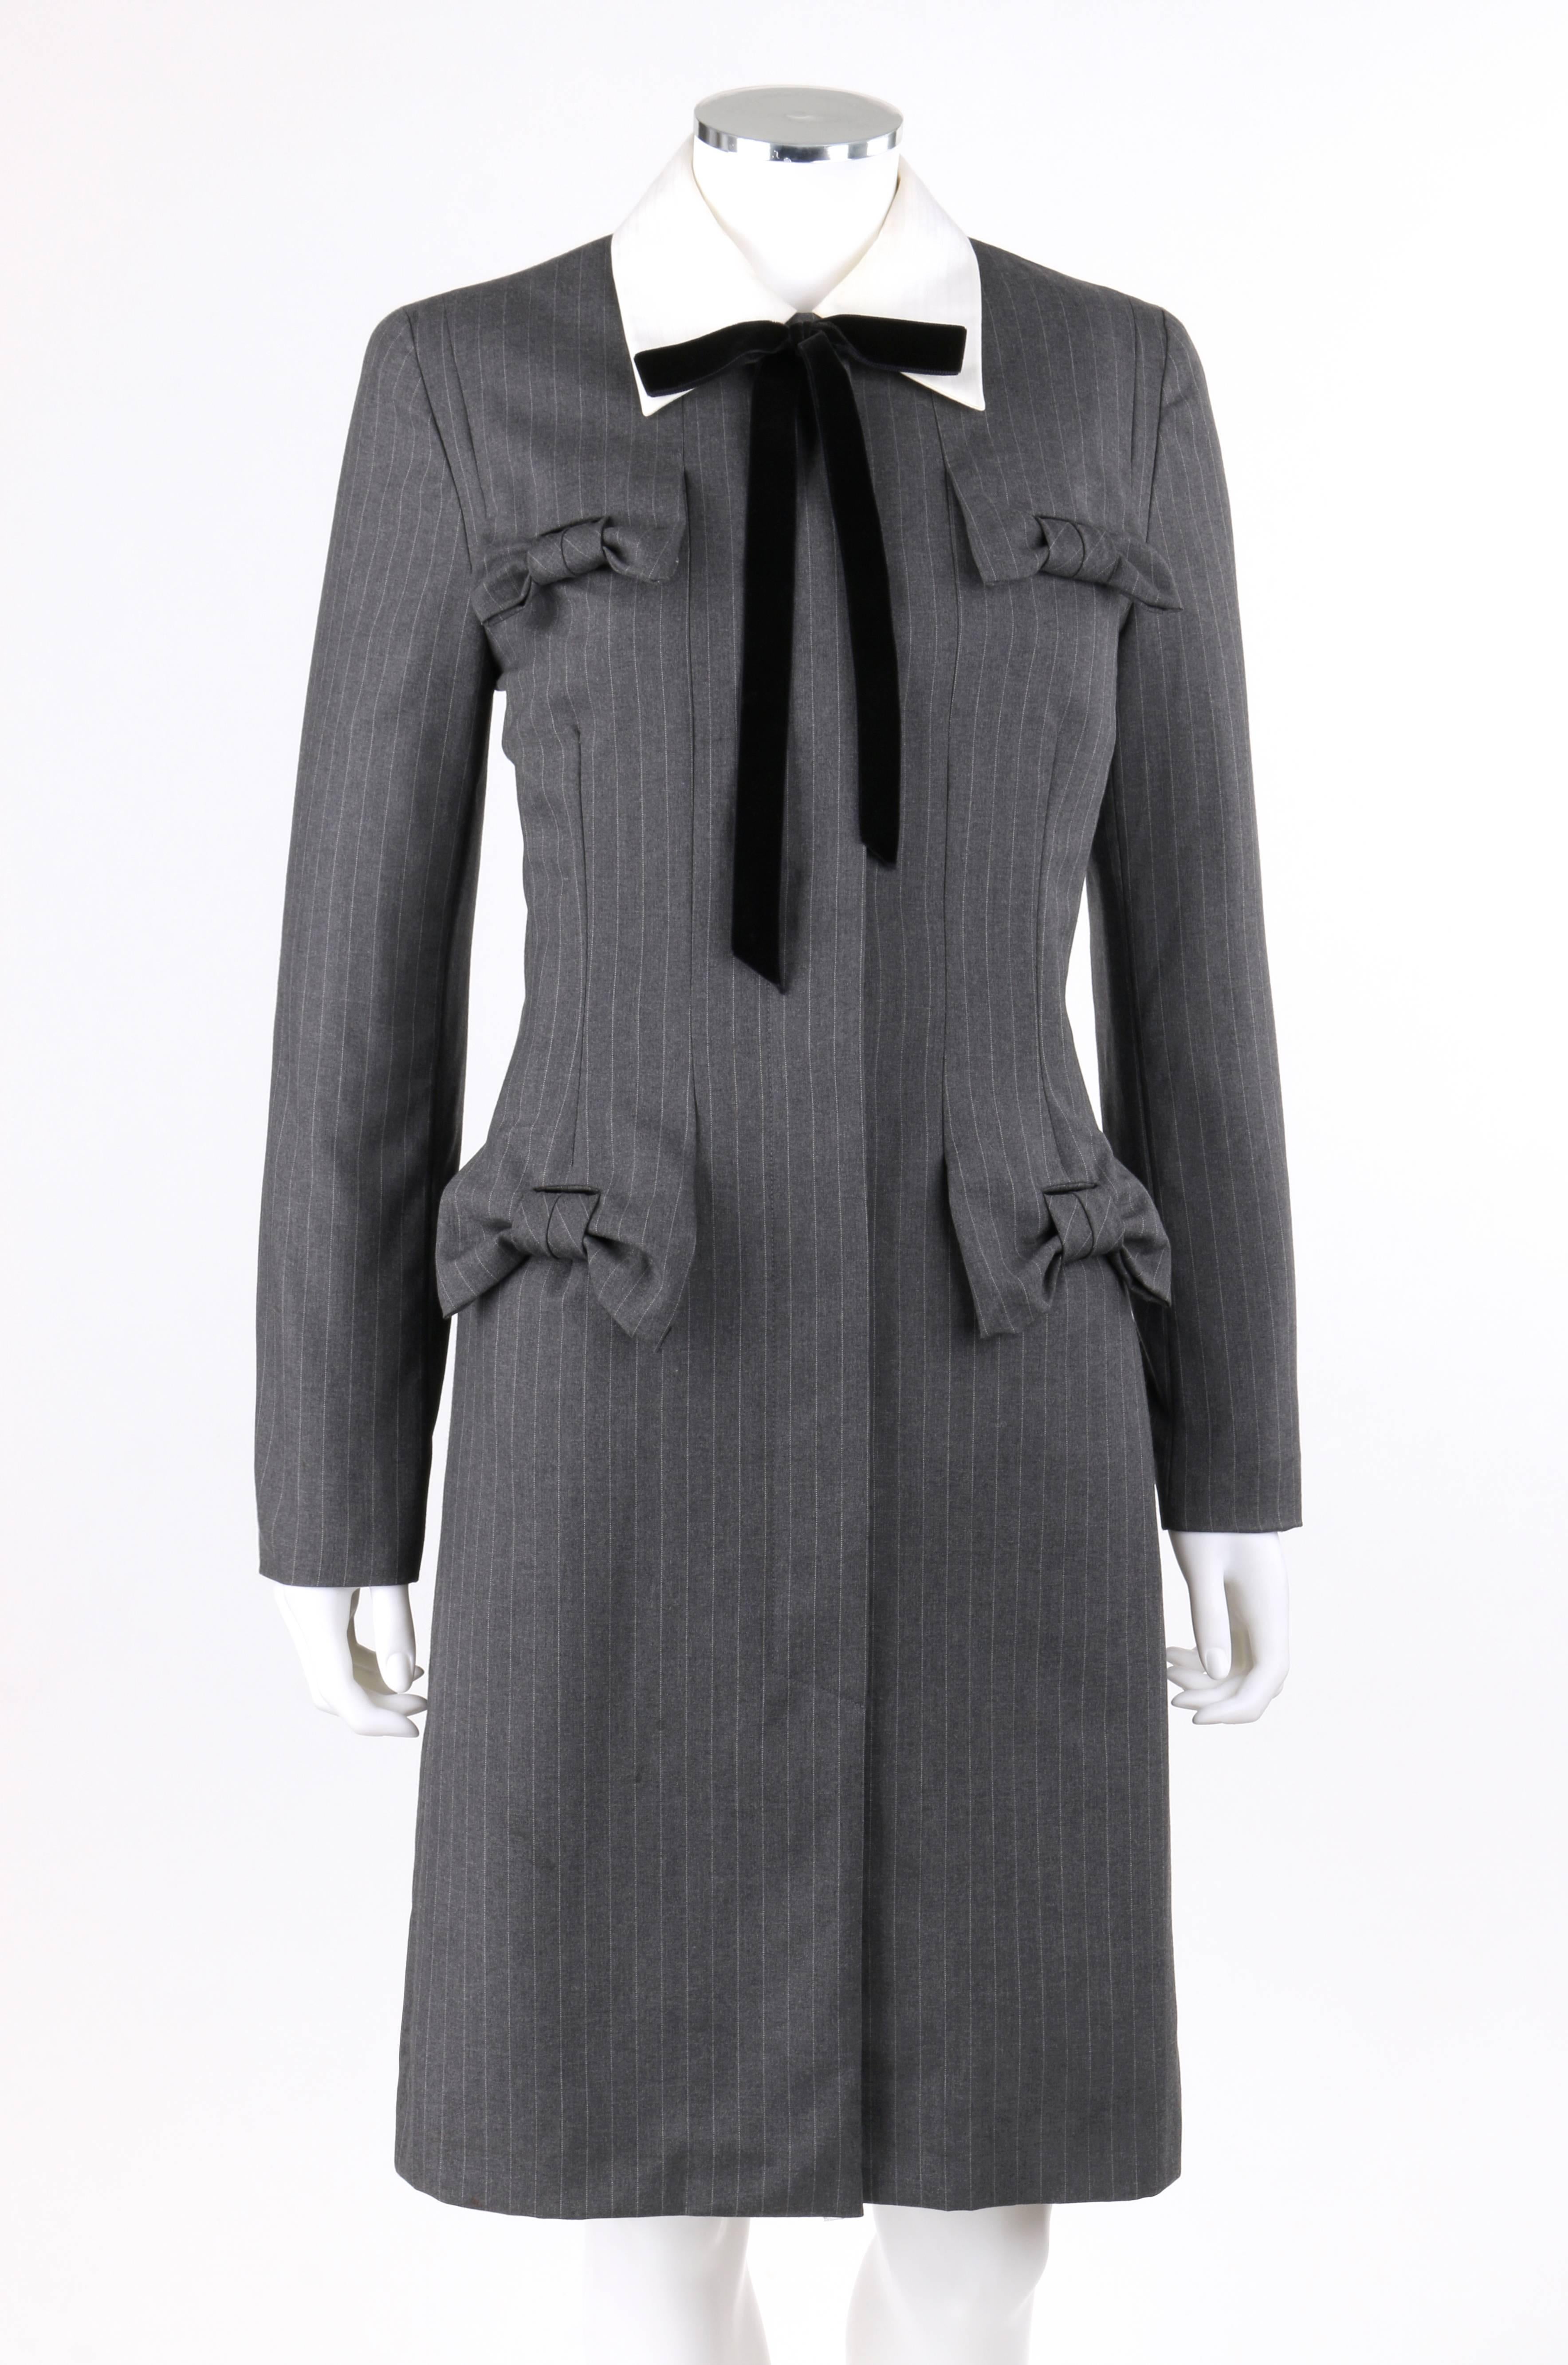 Givenchy Couture Autumn / Winter 1996 charcoal gray wool bow shirt / coat dress. Runway look designed by John Galliano. Charcoal gray pinstripe wool. White pinstripe detachable shirt collar with seven button closures. Black velvet ribbon bow at